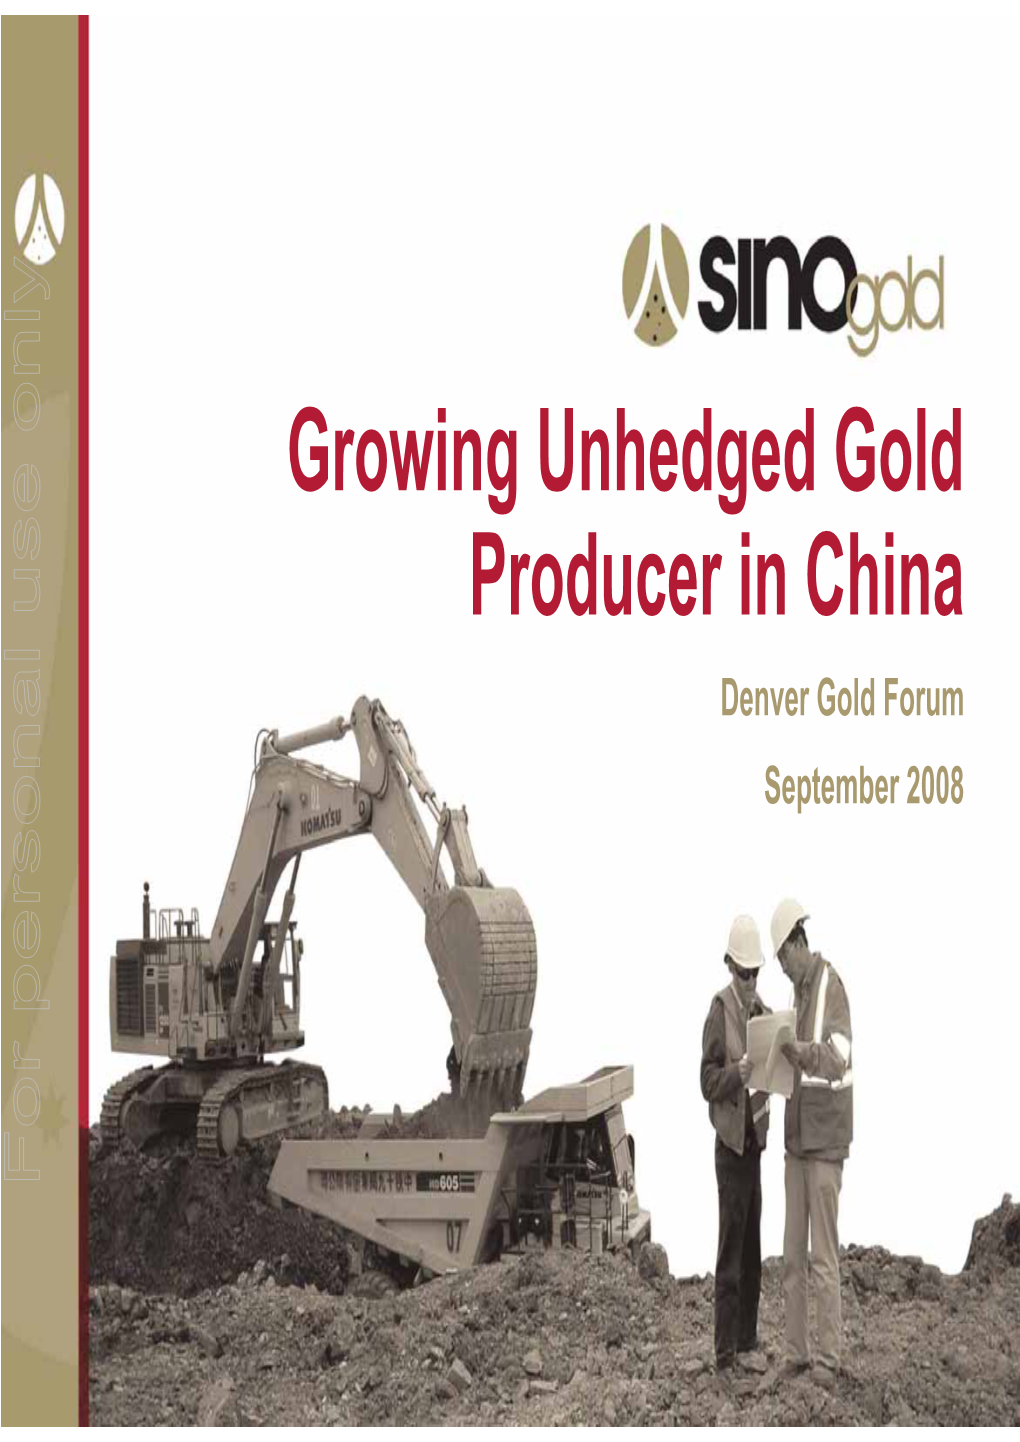 Sino Gold Limited (‘Sino Gold’) at the Time of Preparation